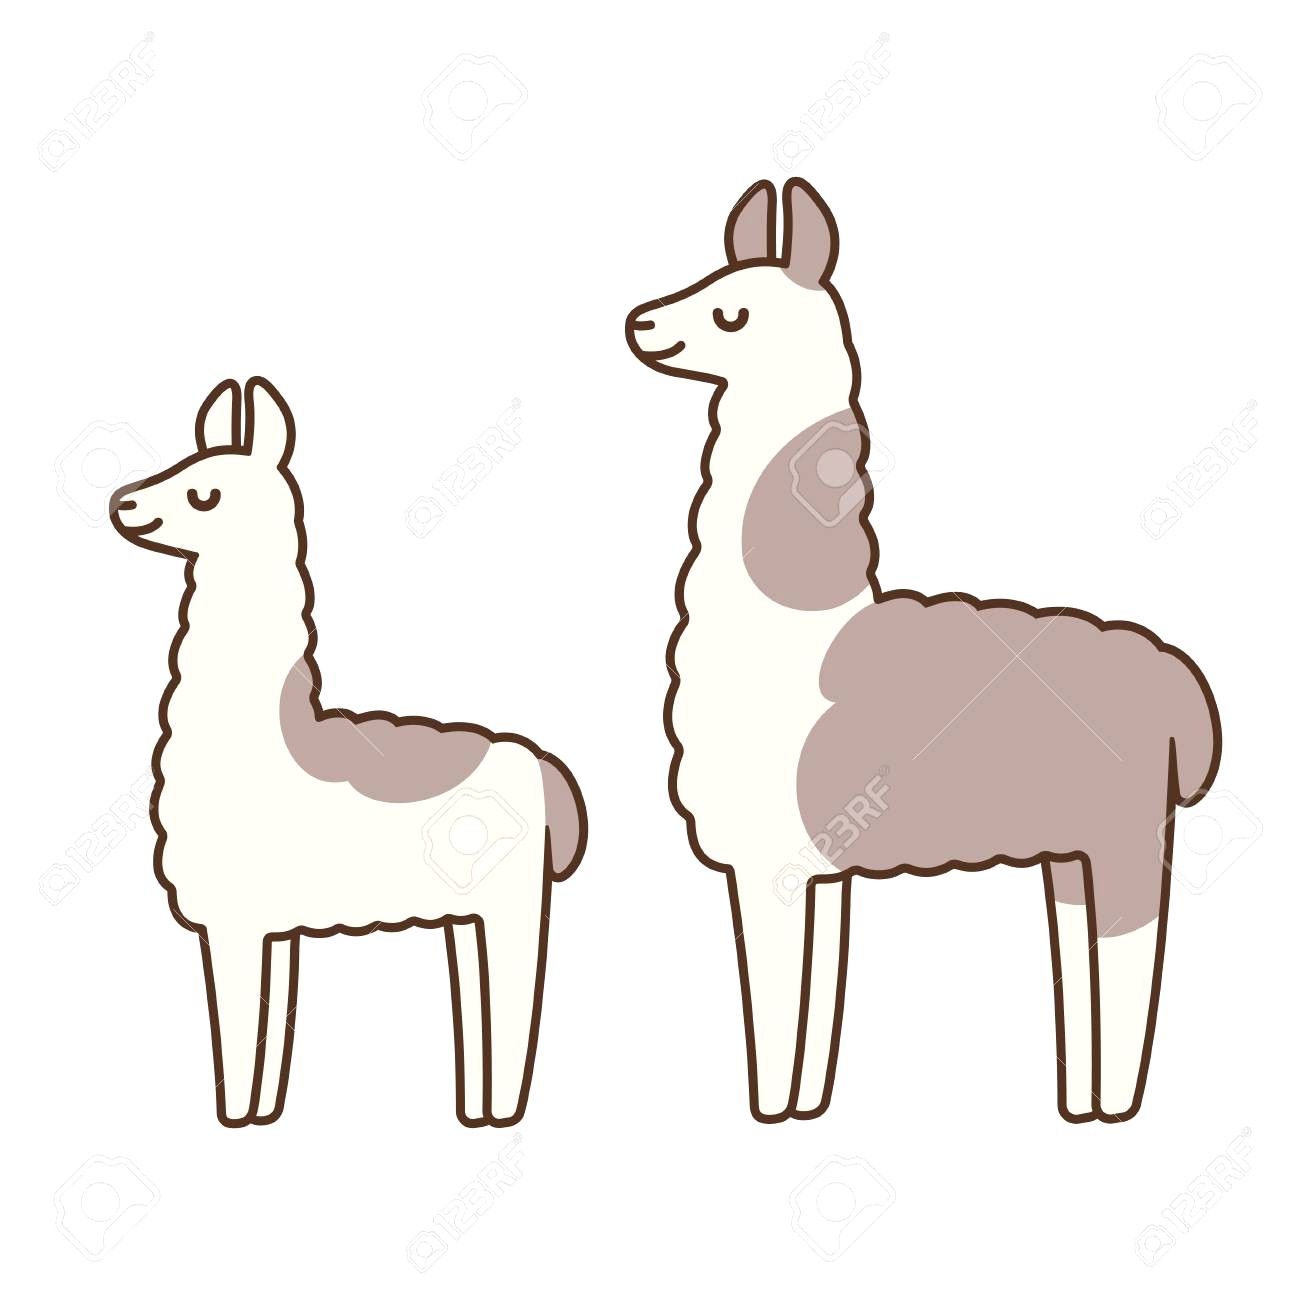 llama line drawing free on clipartmag